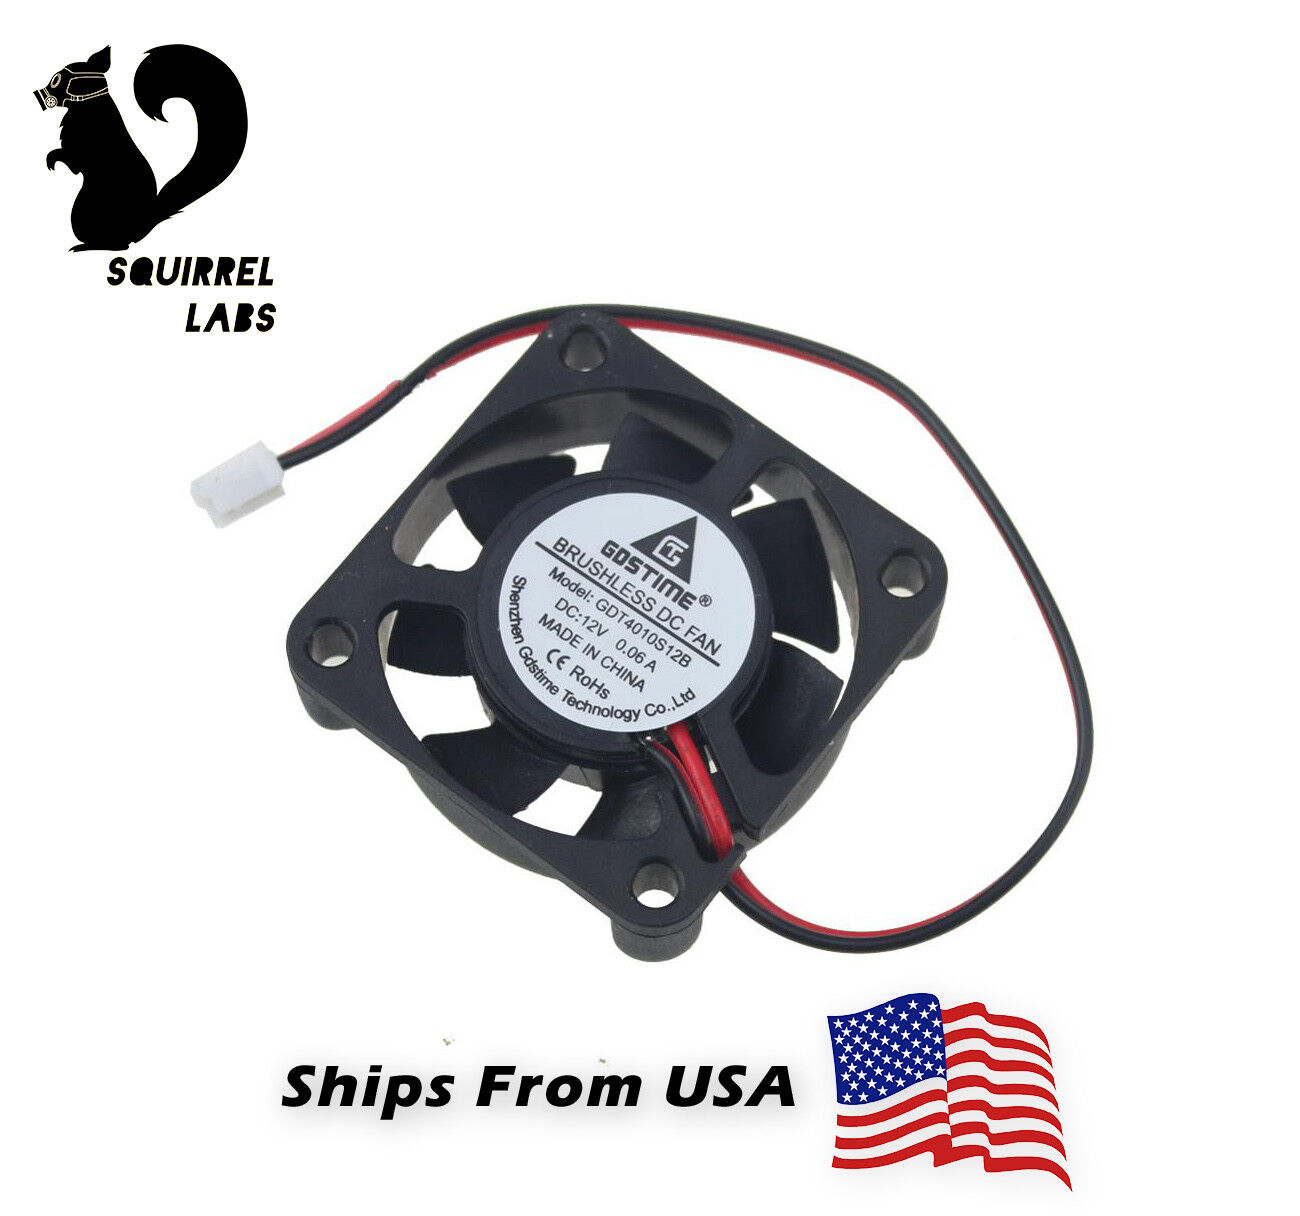 12V Cooling Computer Fan Small 40mm x 10mm DC Brushless 2-pin RepRap US SHIPPING